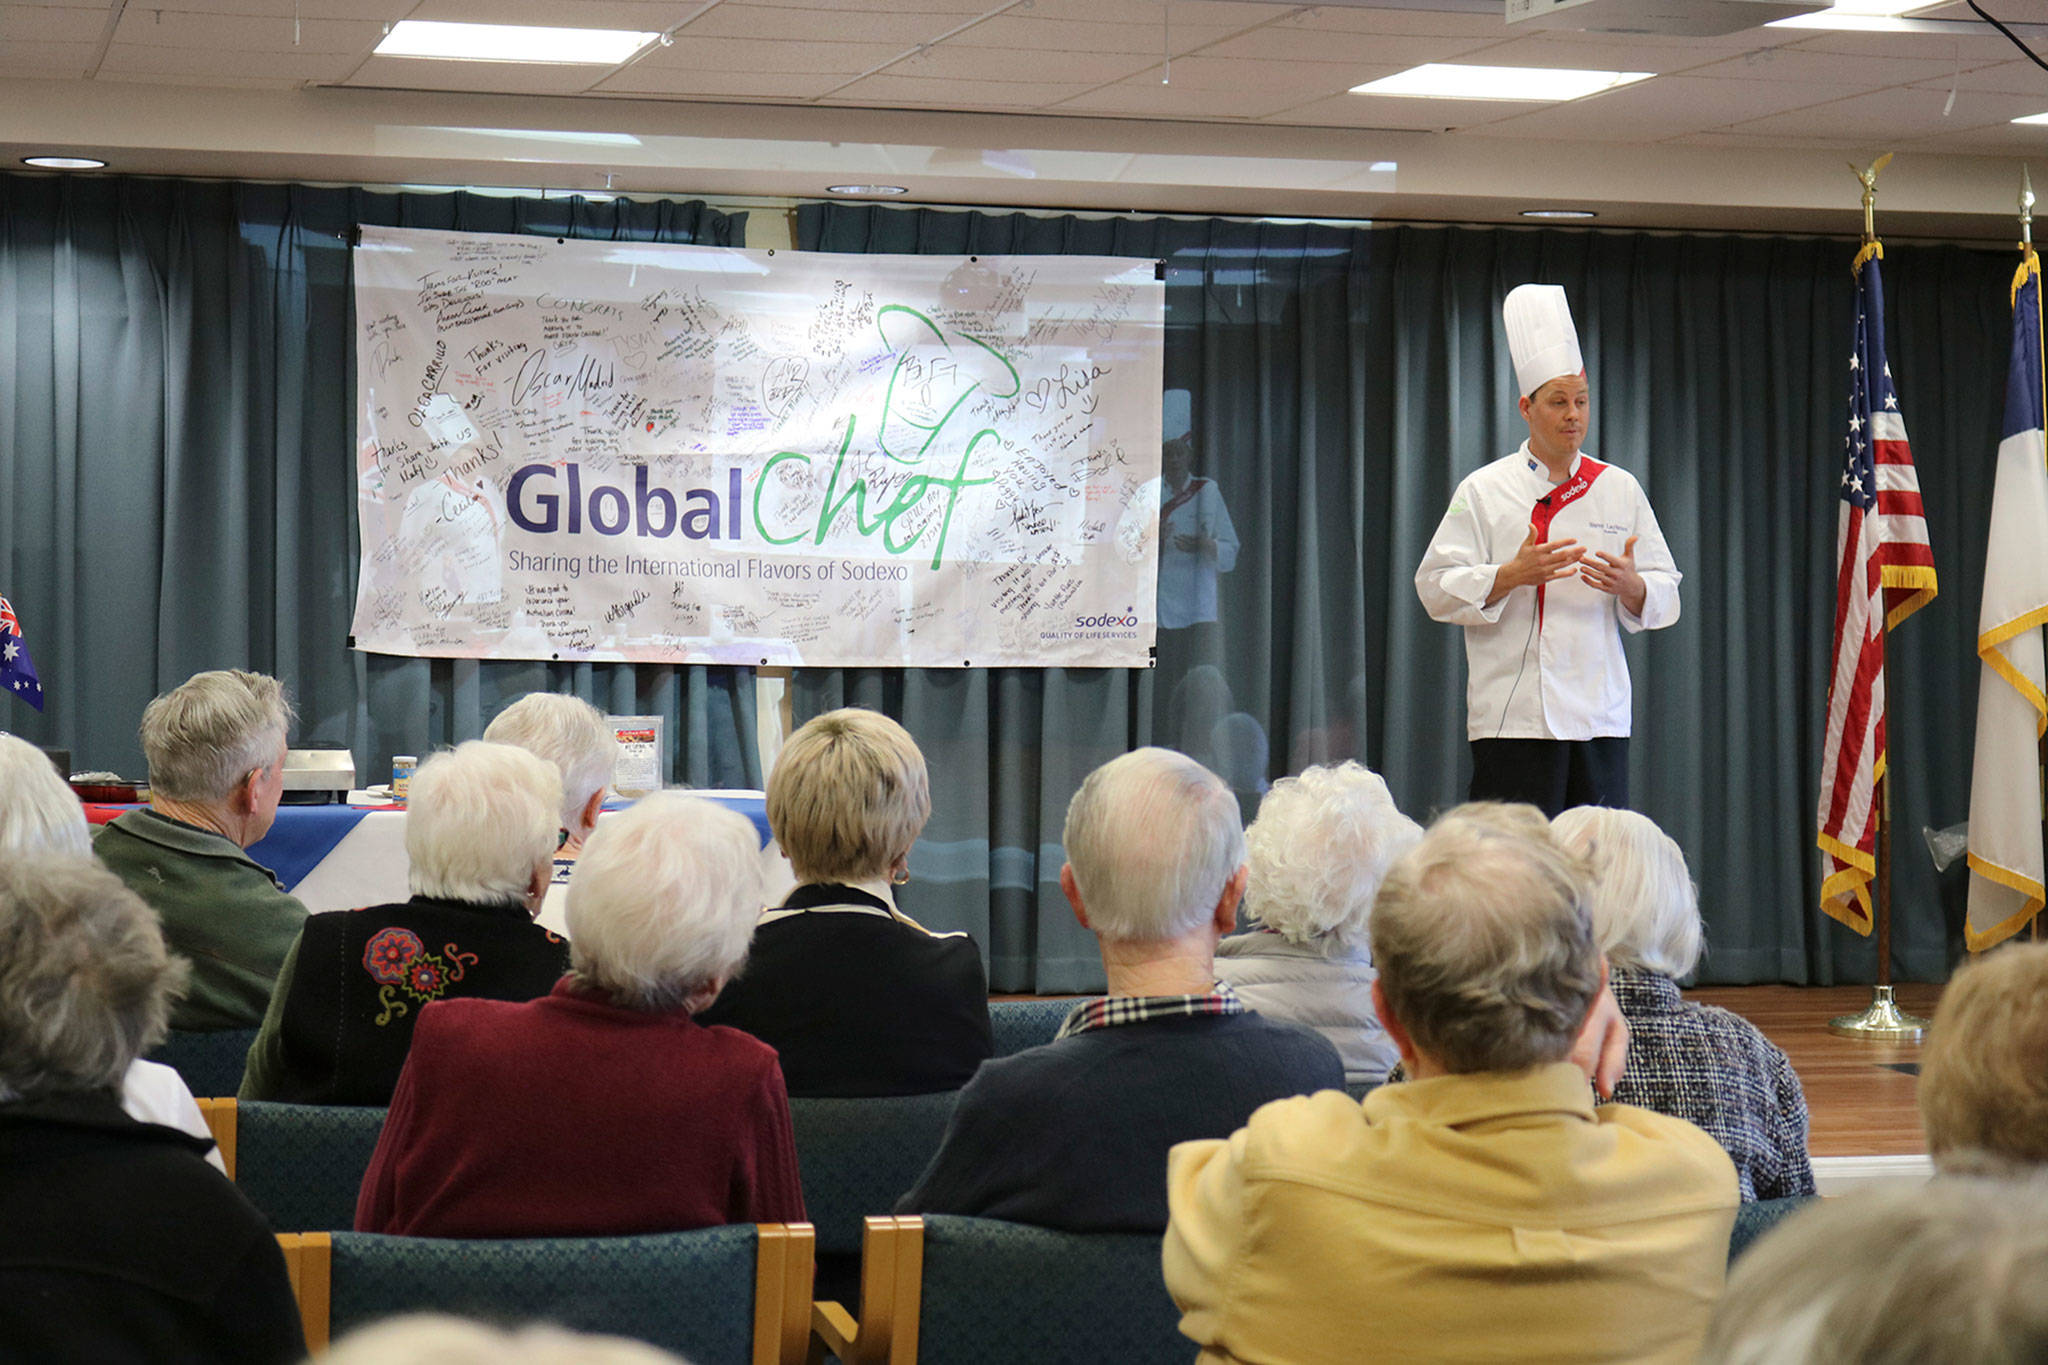 The Australian cooking demonstration was part of Sodexo’s global chef program. Katie Metzger/staff photo